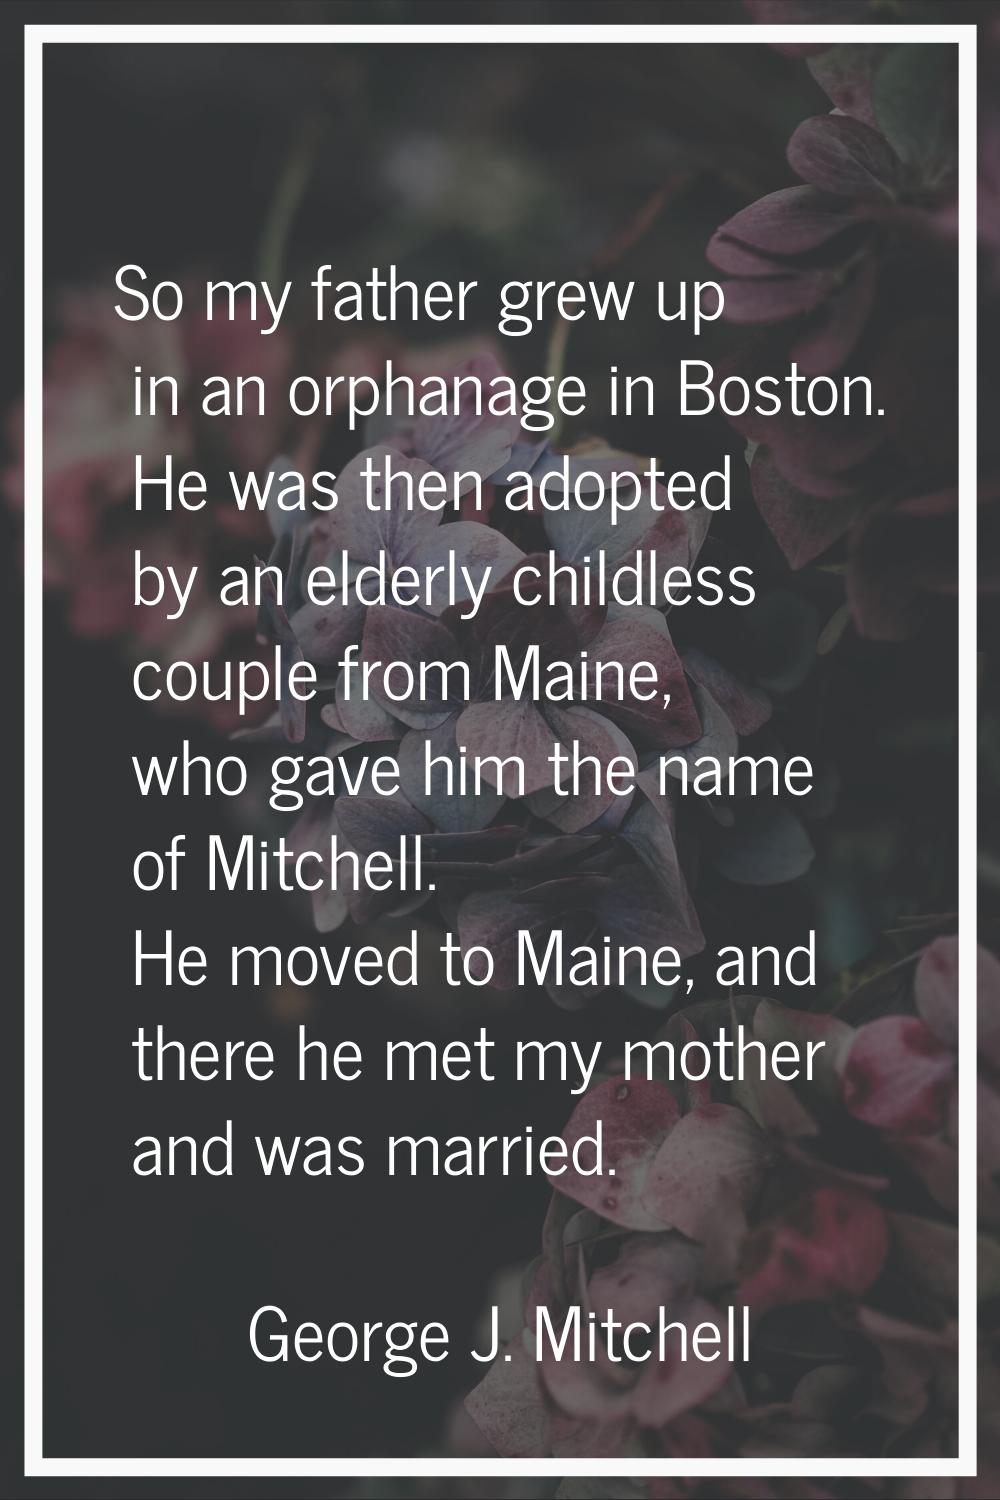 So my father grew up in an orphanage in Boston. He was then adopted by an elderly childless couple 